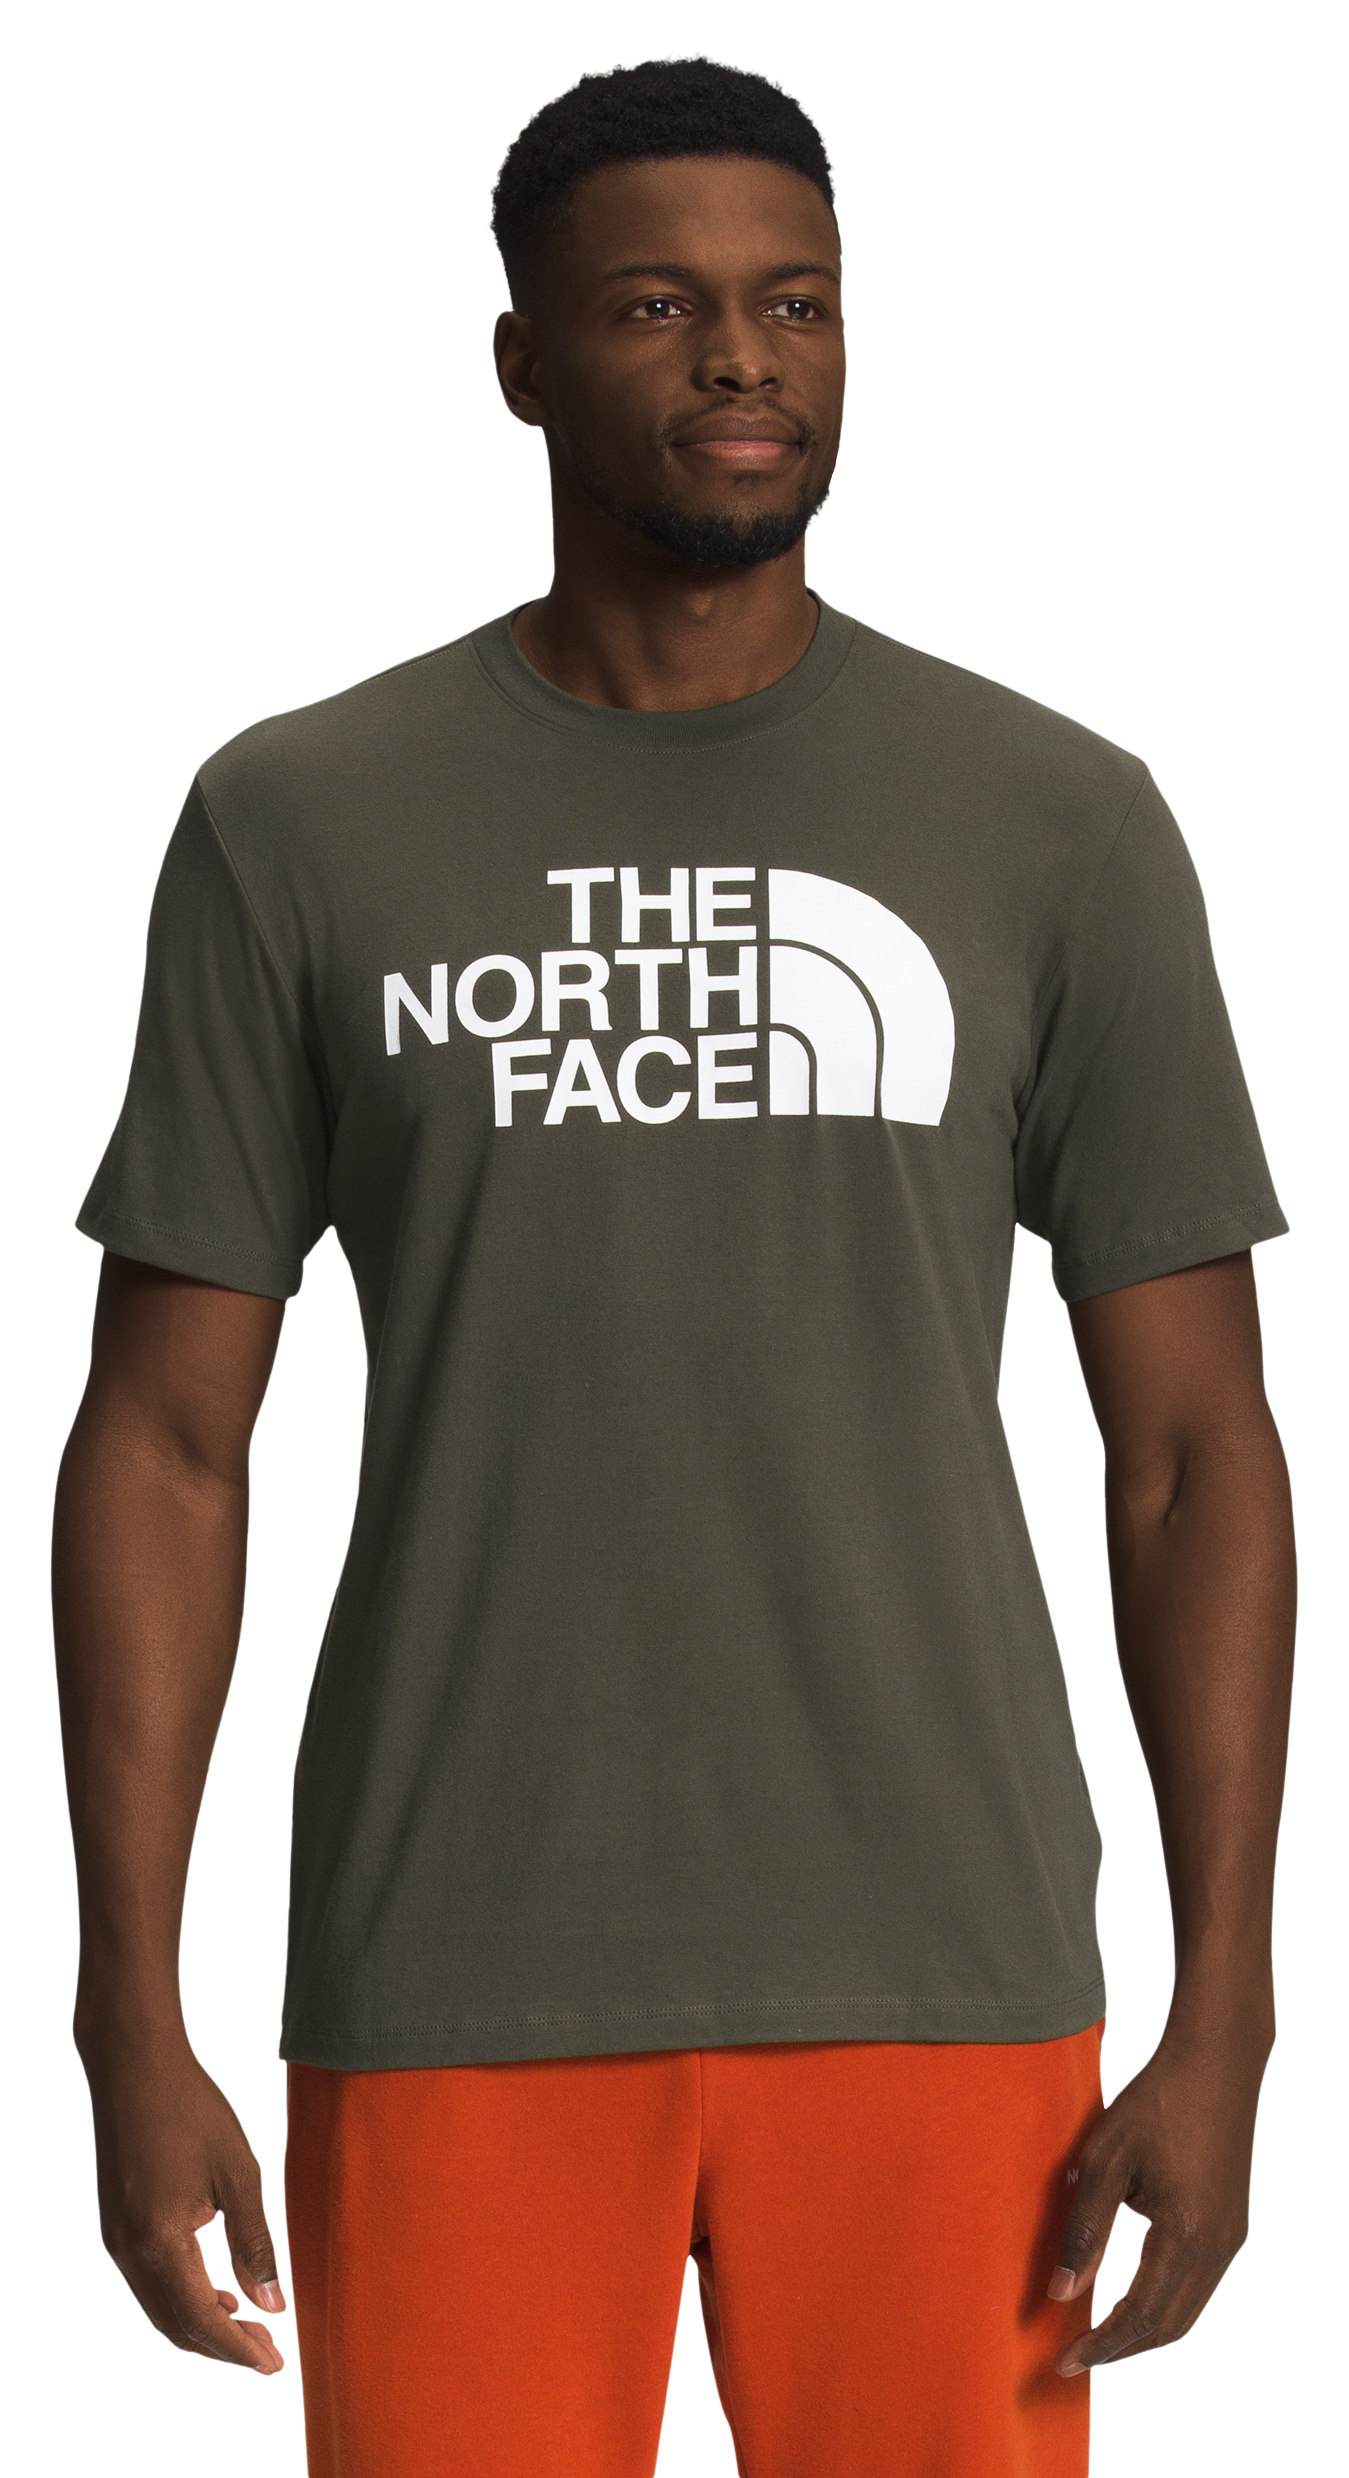 The North Face Half Dome Short-Sleeve T-Shirt for Men - New Taupe Green/White - XL